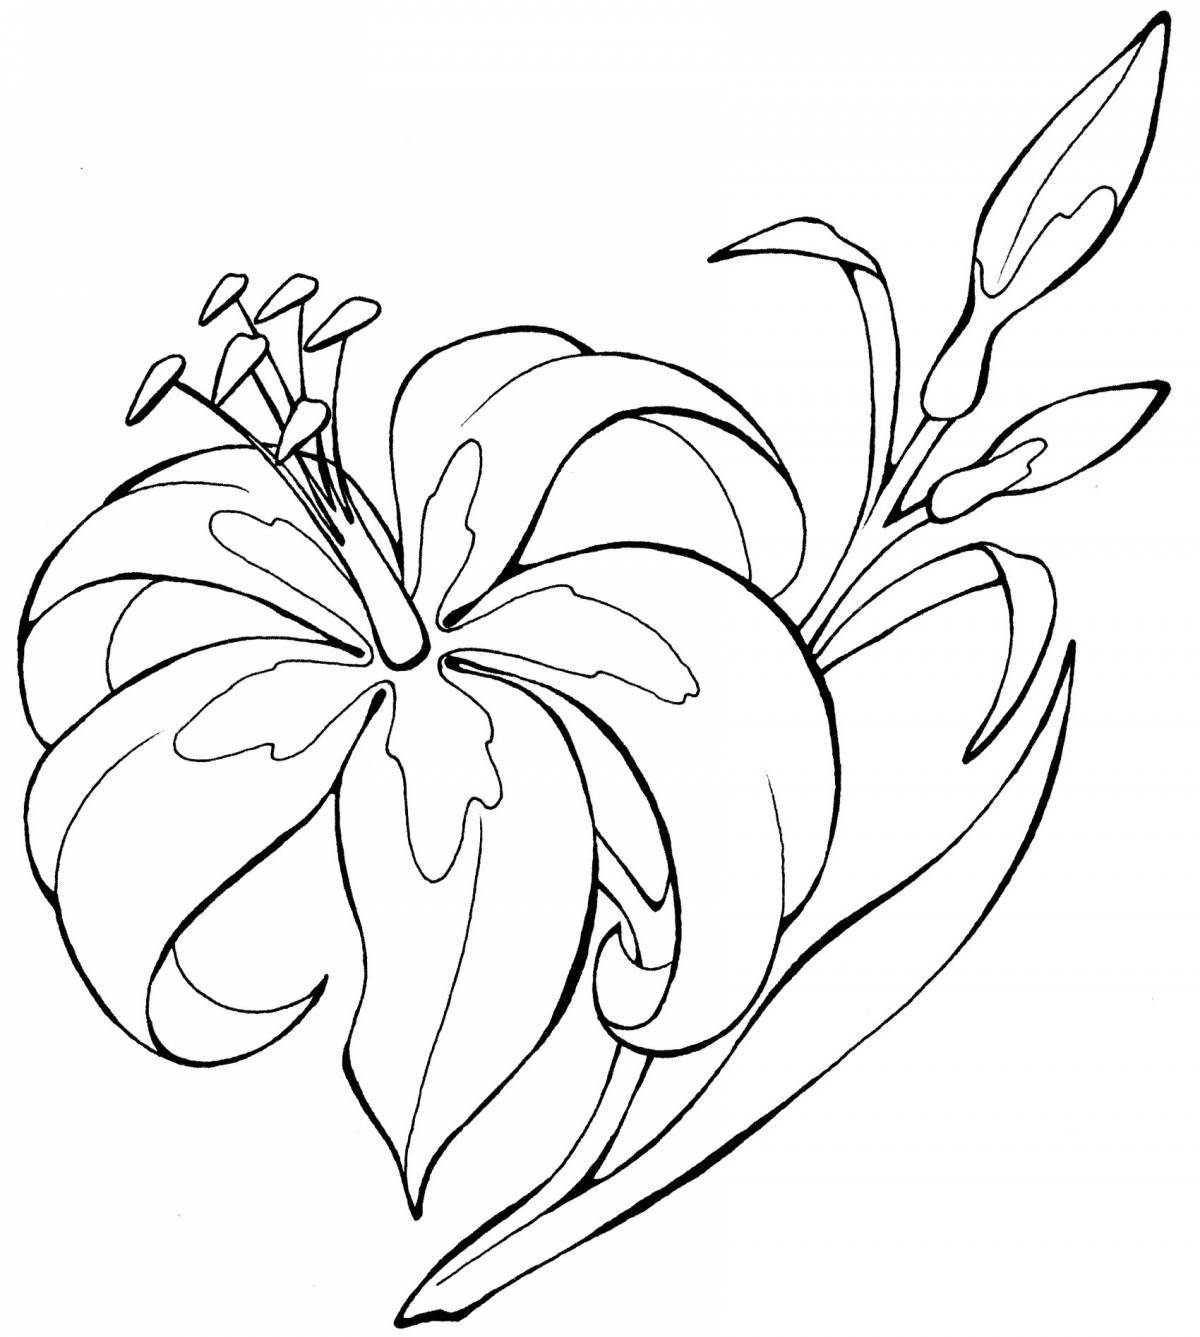 Sparkling lily coloring book for children